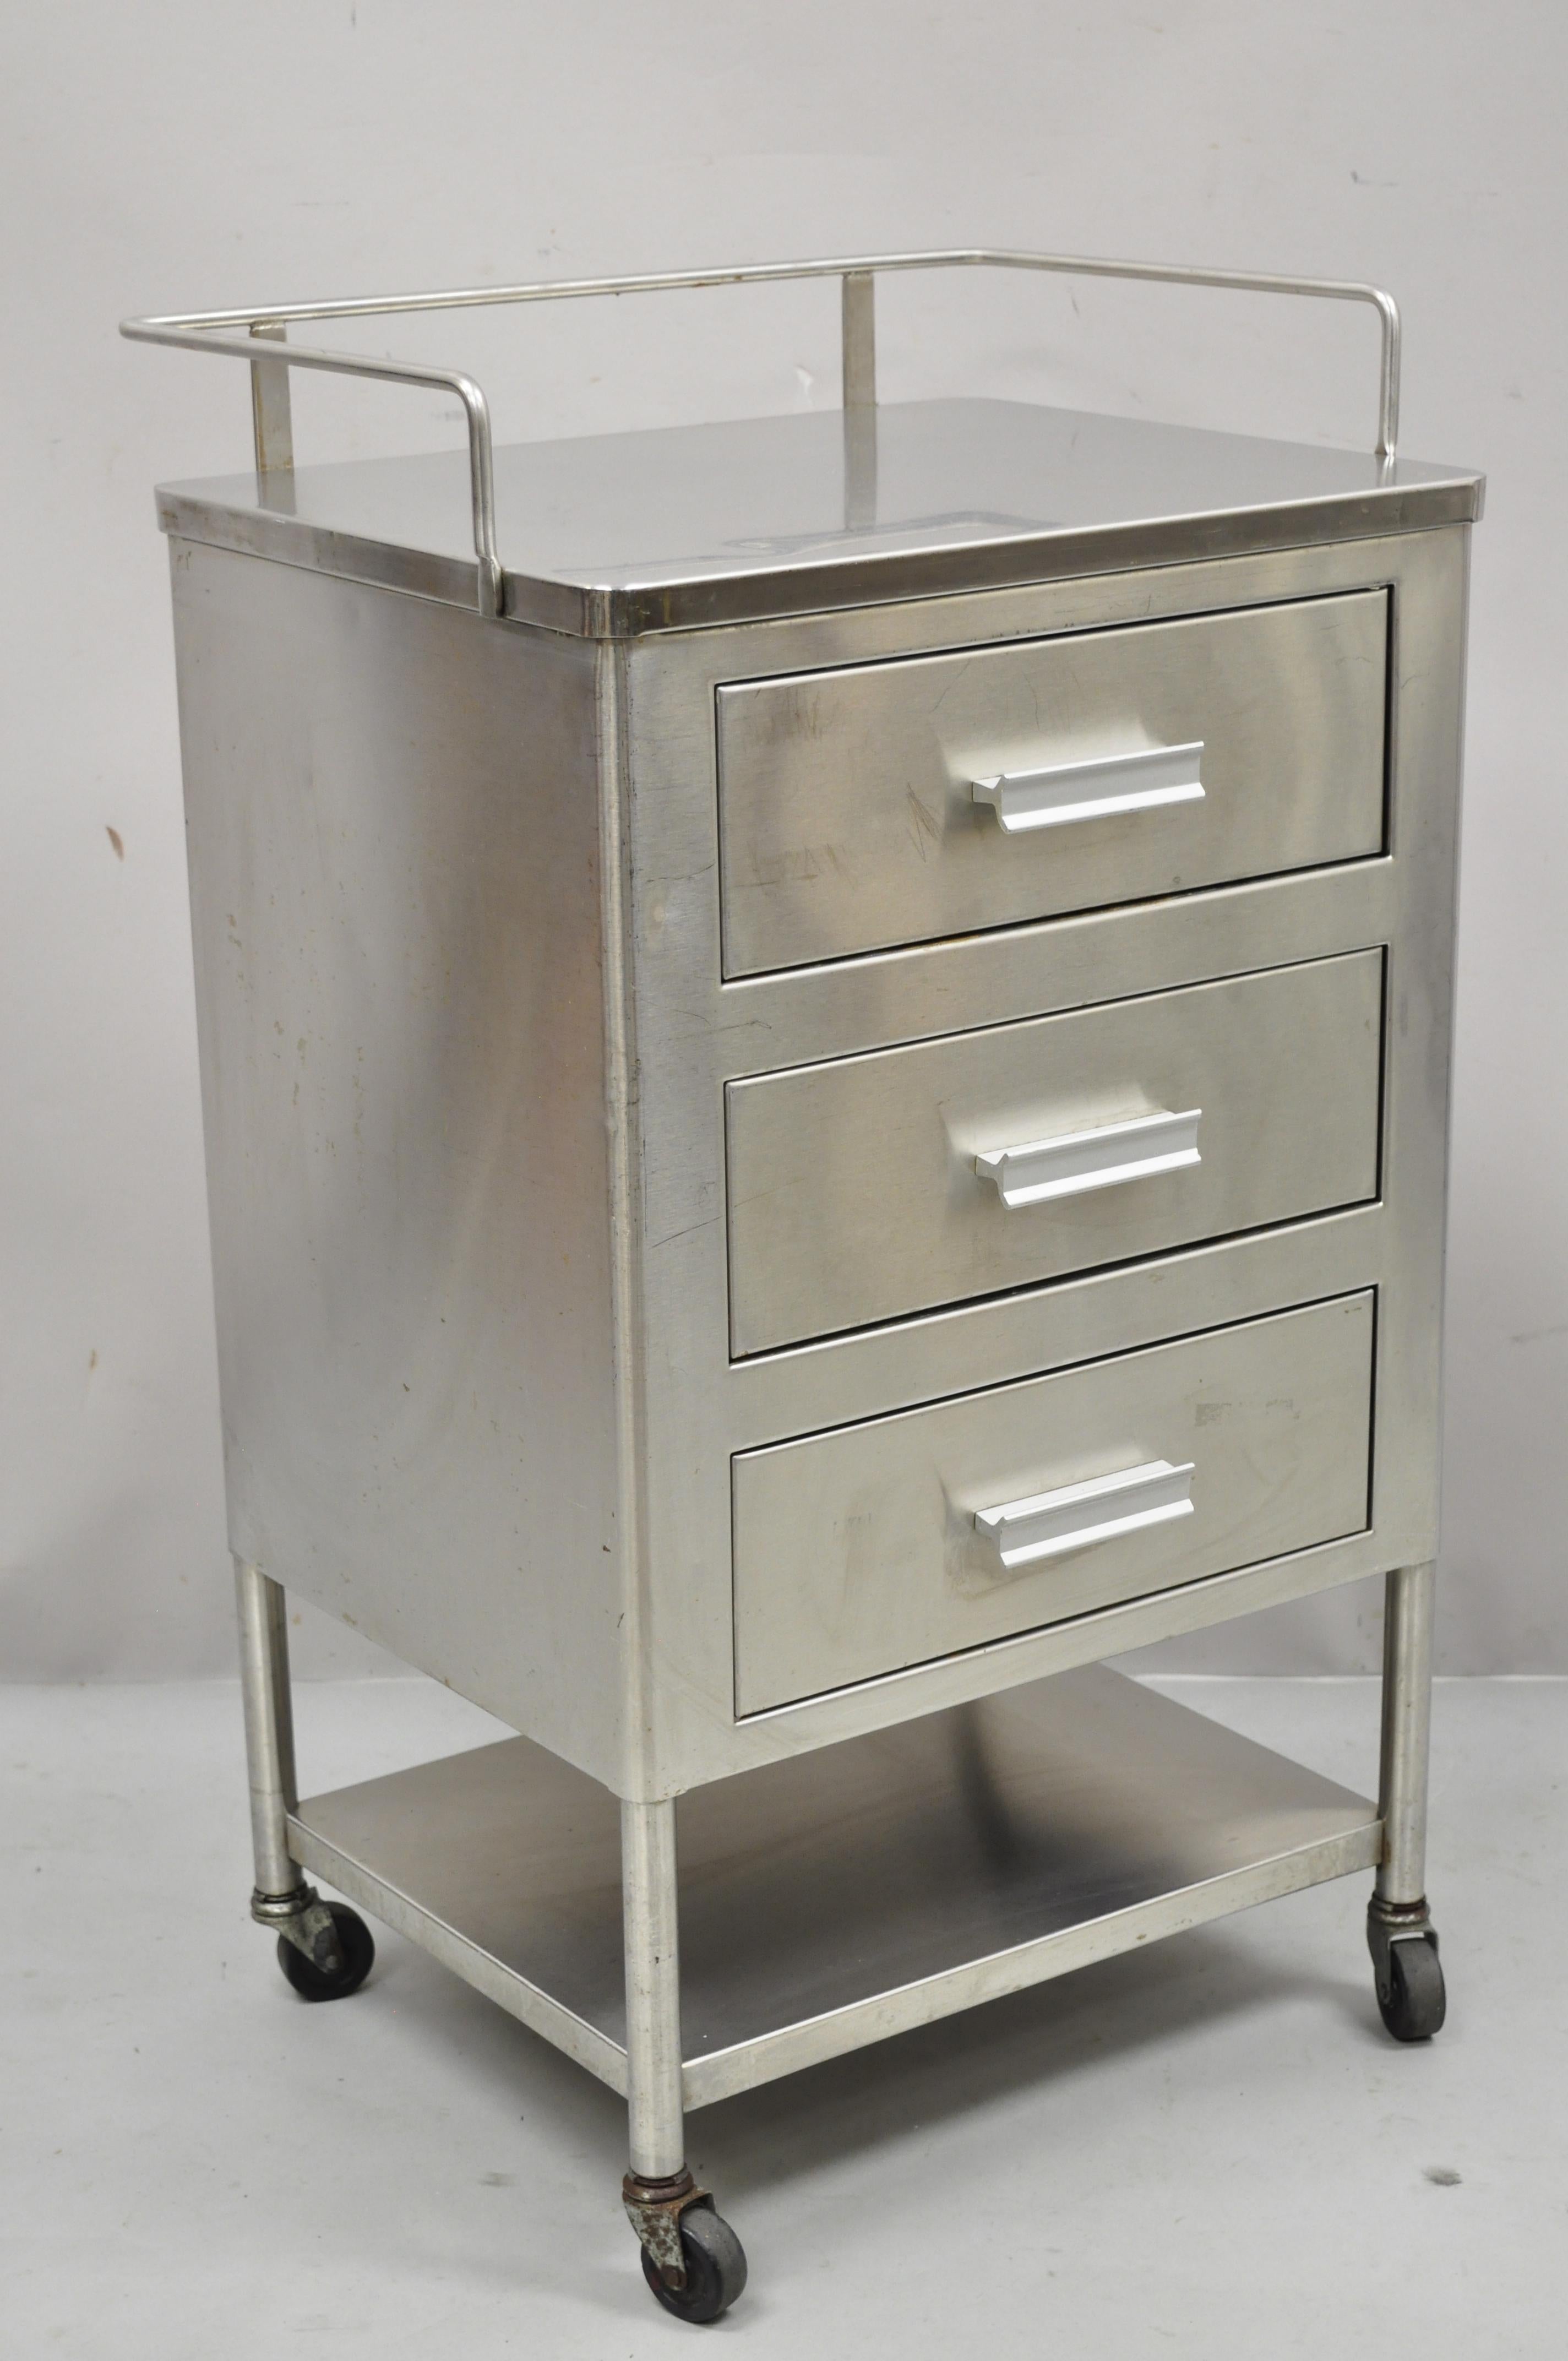 Vintage stainless steel 3 drawer rolling medical dental cabinet nightstand side table on wheels. Item features rolling casters, stainless steel construction, lower shelf, rear gallery, 3 drawers, quality American craftsmanship, great style and form,